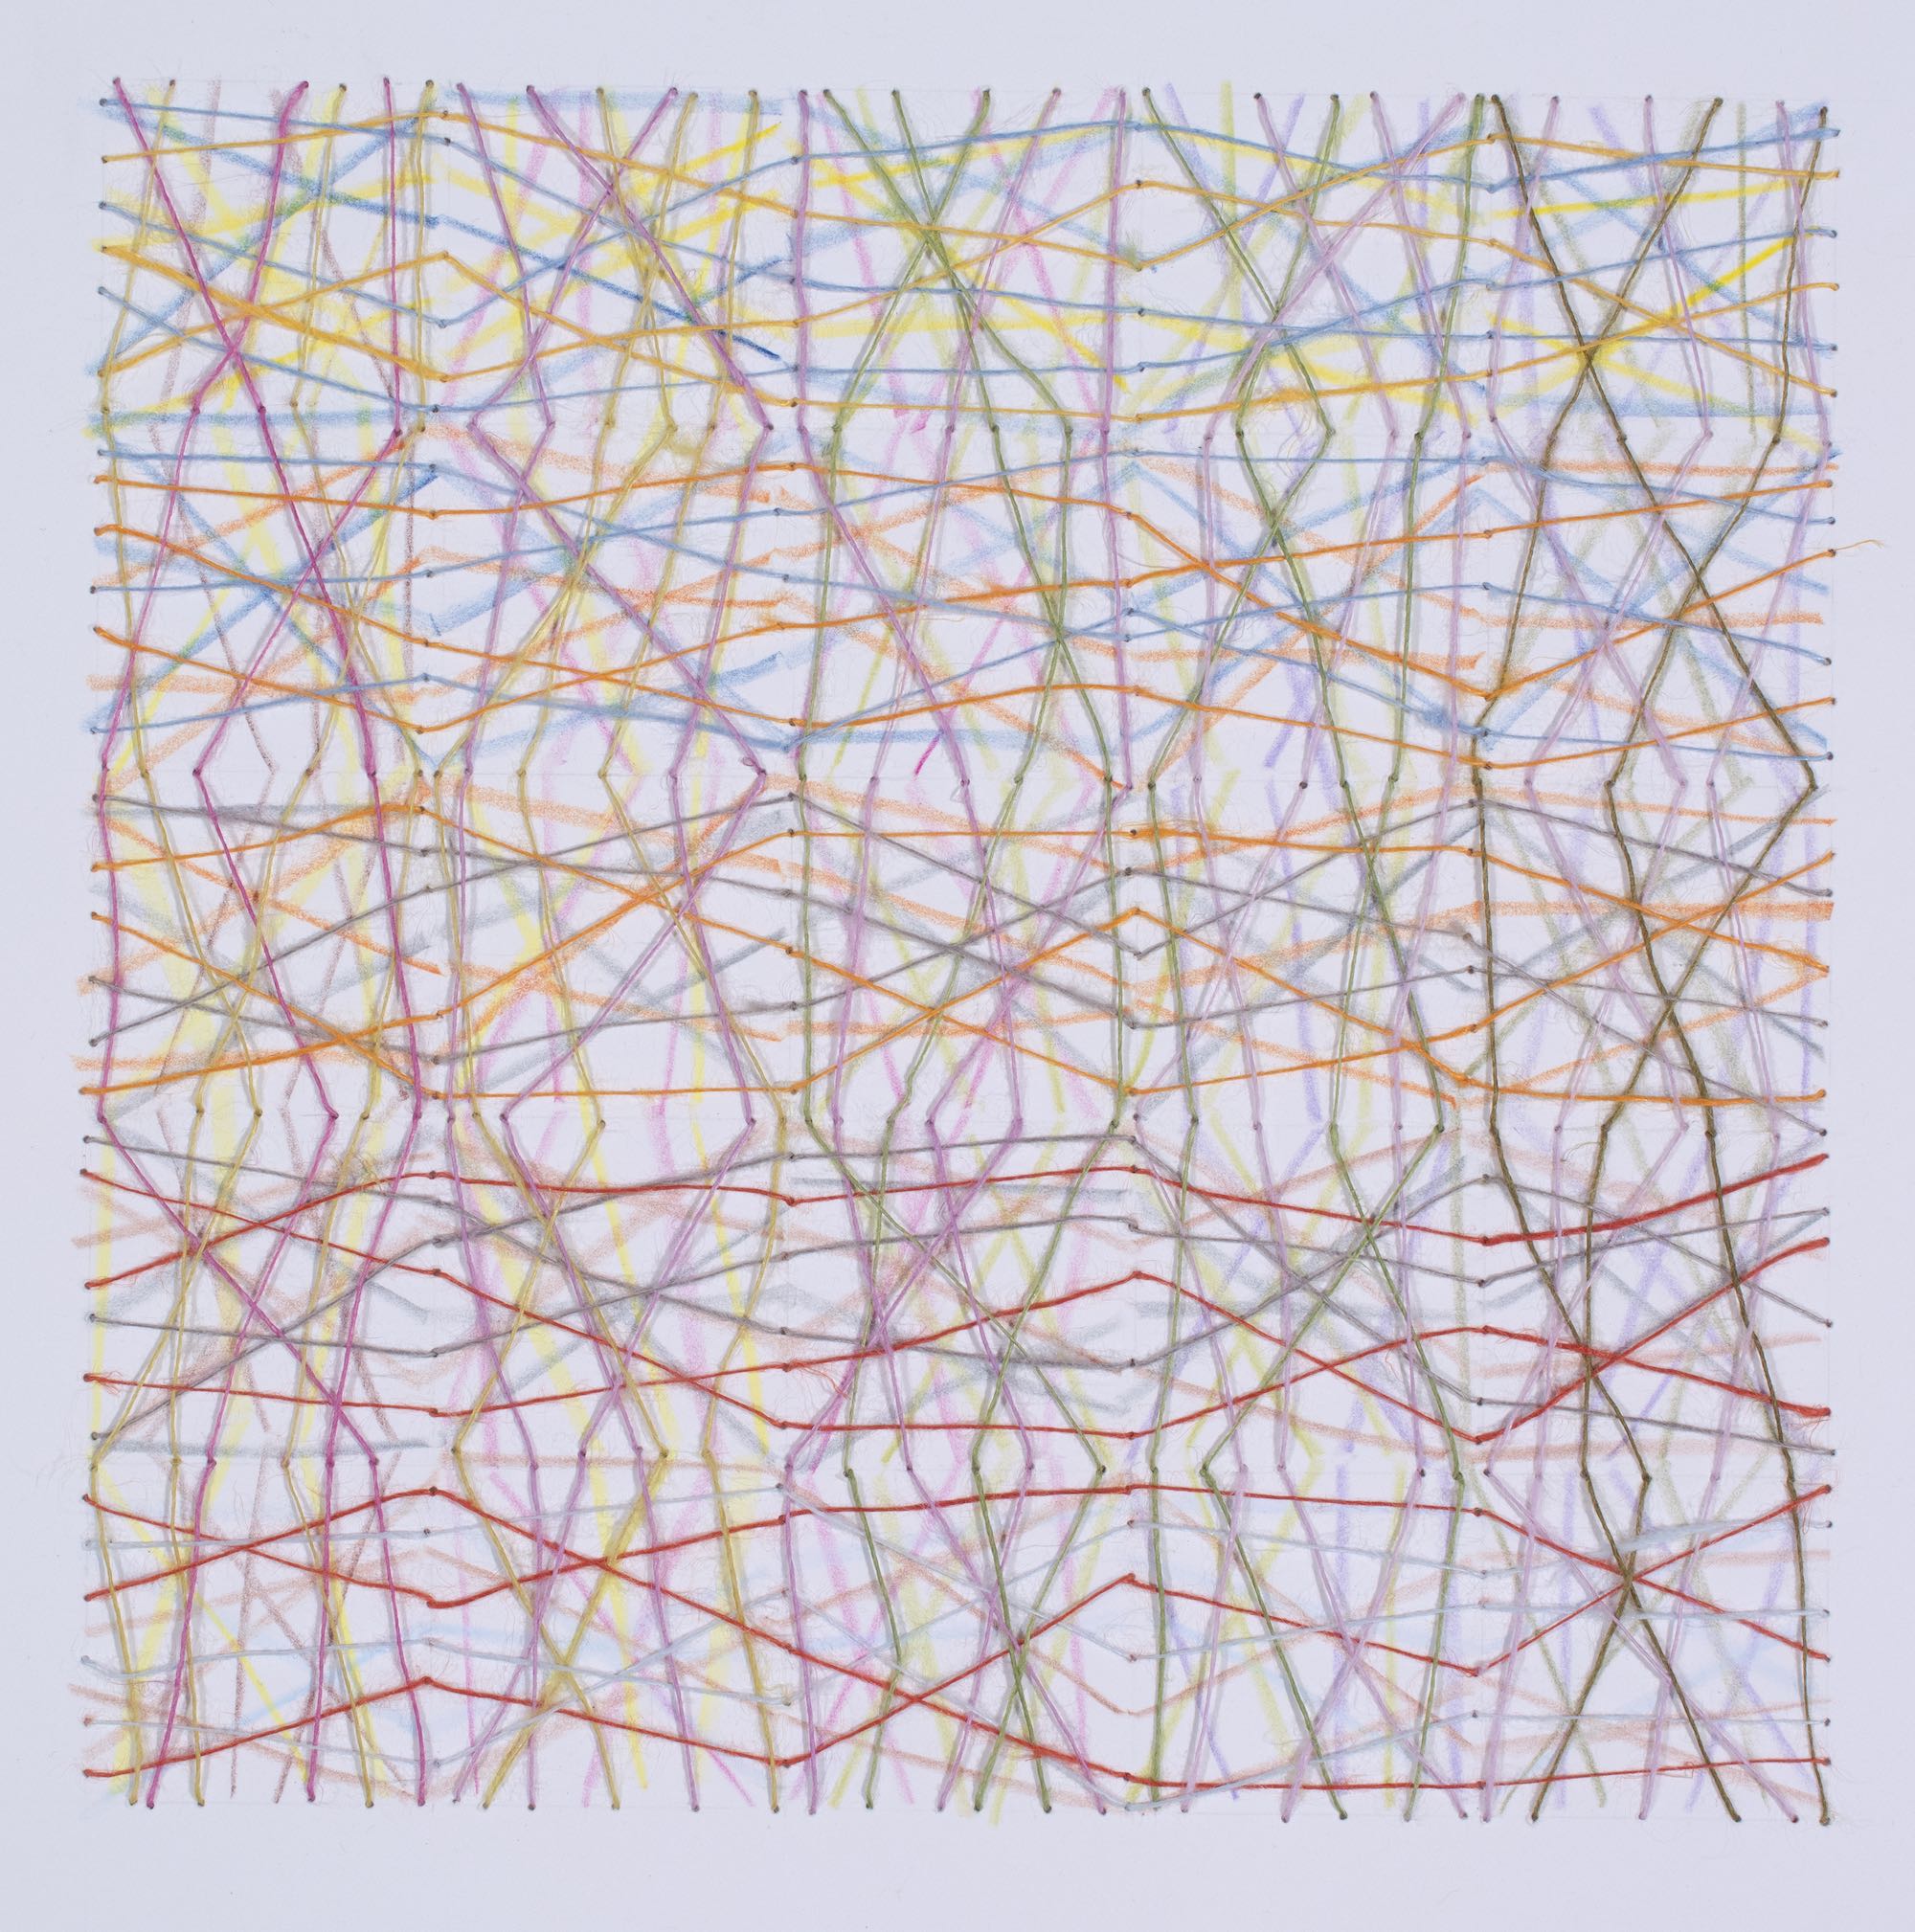   Lines with Thread    Wax pastel on paper, linen    9” x  9”  